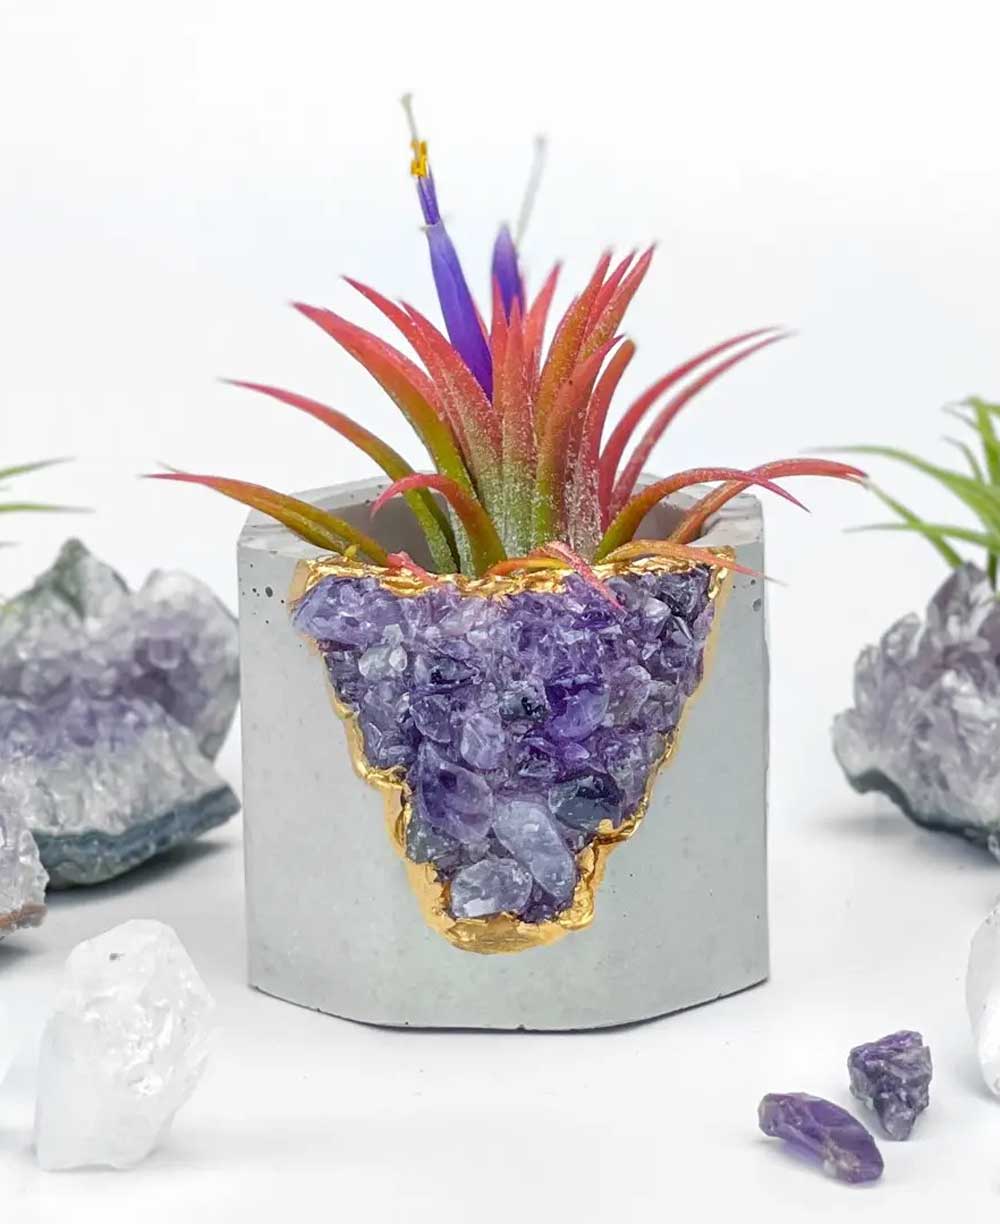 Small Gemstone and Concrete Air Plant or Tea-light Candle Holder - Pots & Planters Amethyst